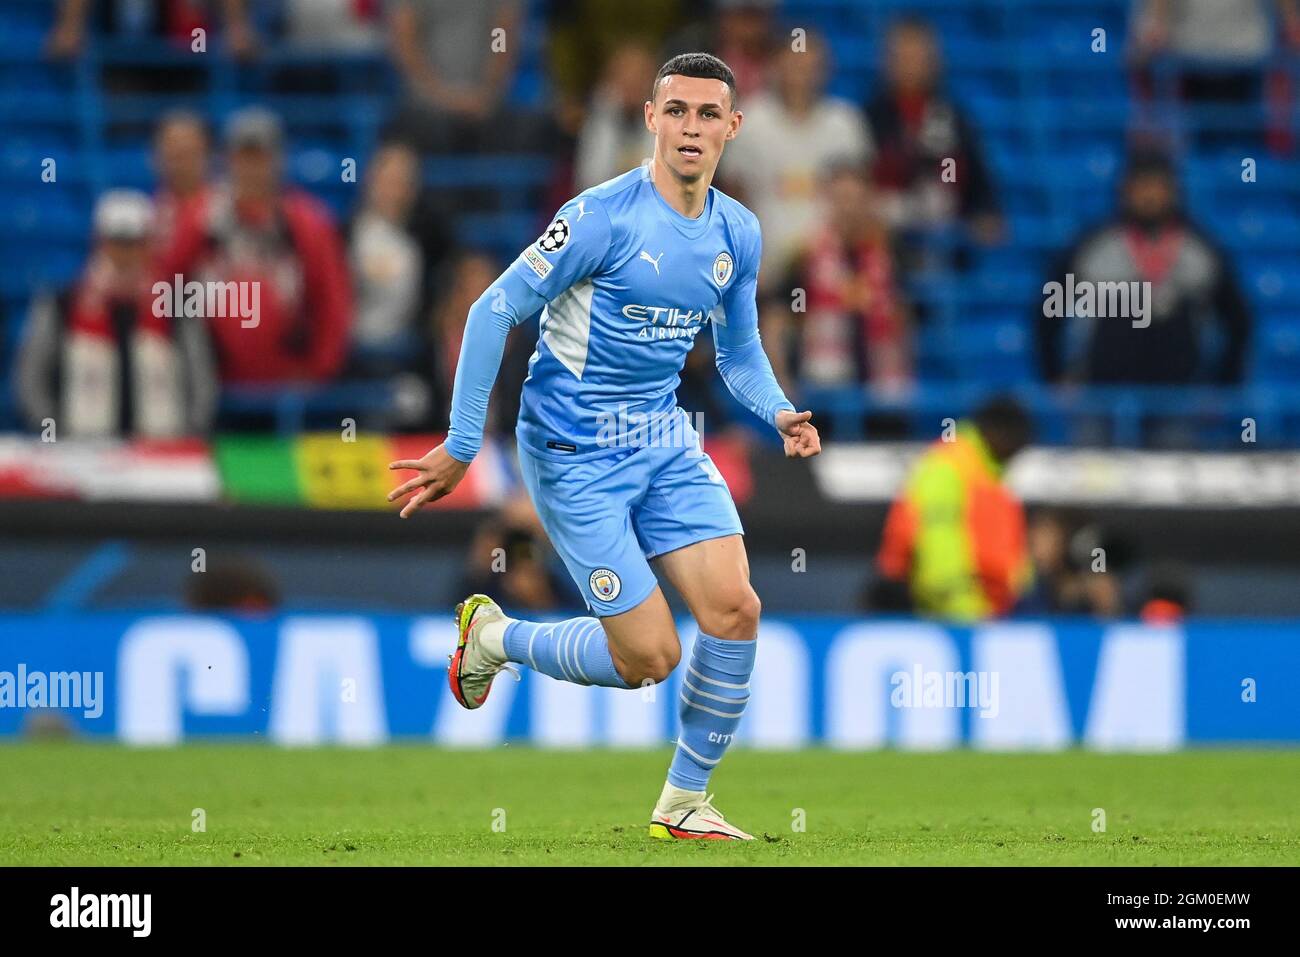 Phil Foden #47 of Manchester City in action during the game Stock Photo